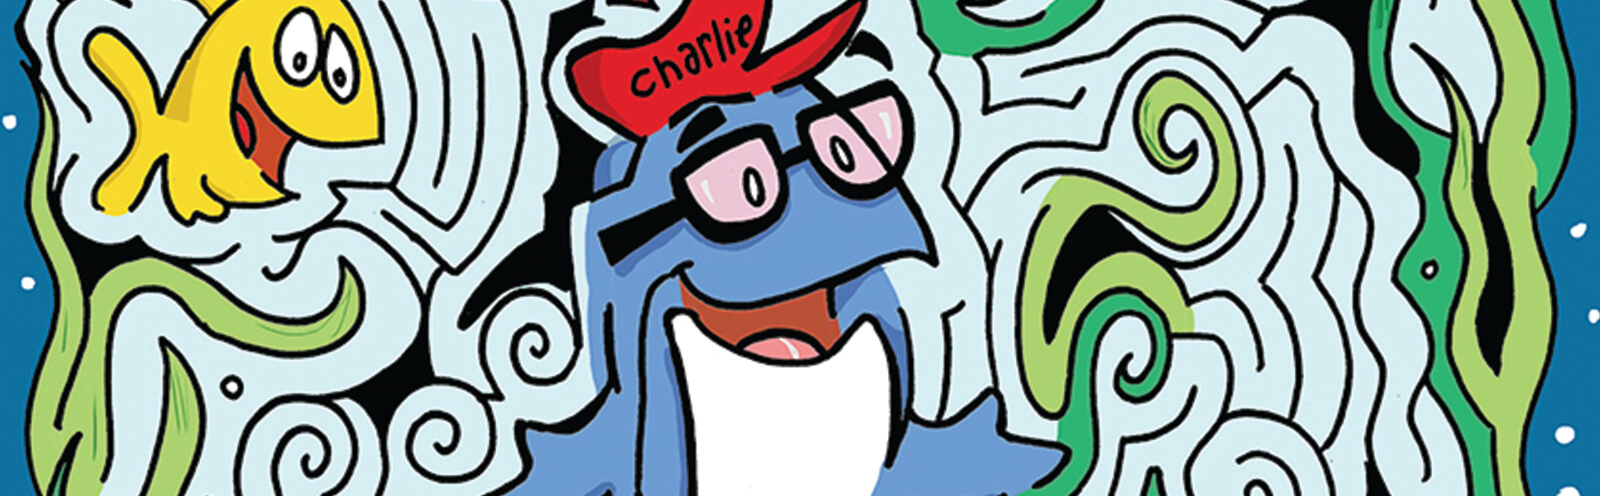 Kids Activity Sheet featuring Charlie the Tuna